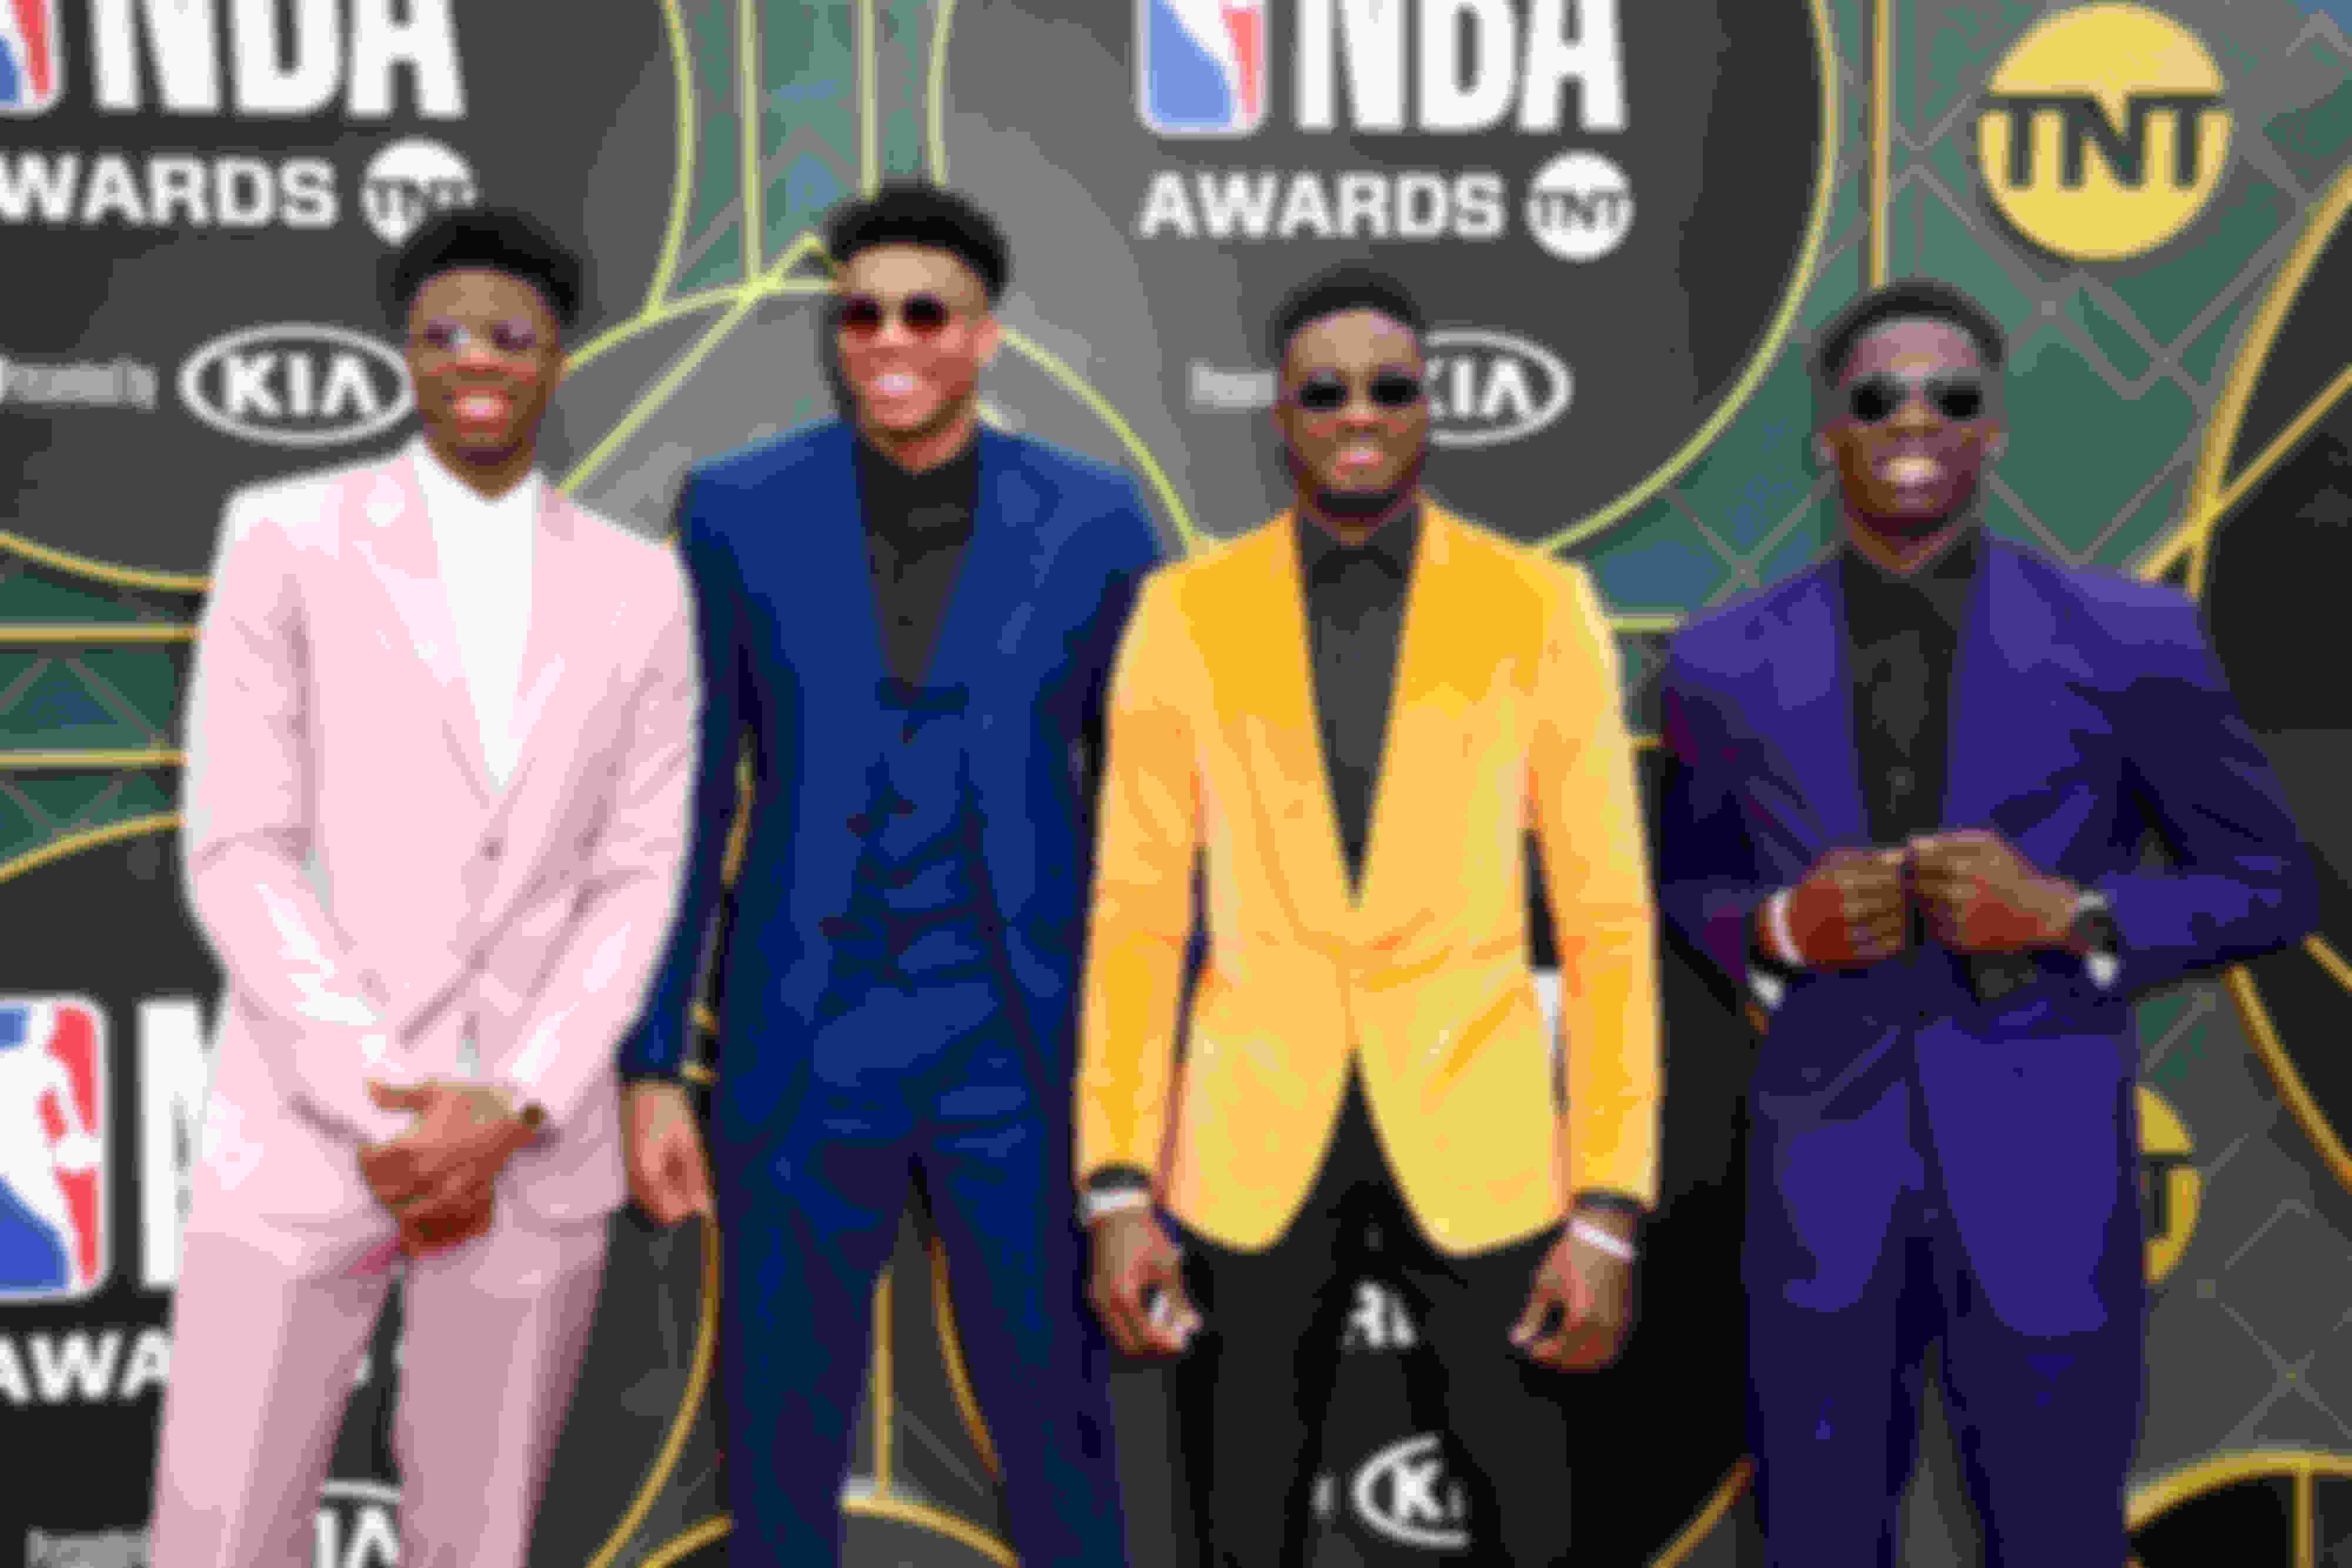 Antetokounmpo brothers (from left to right) Kostas, Giannis, Thanasis, and Alexis are all professional basketball players.